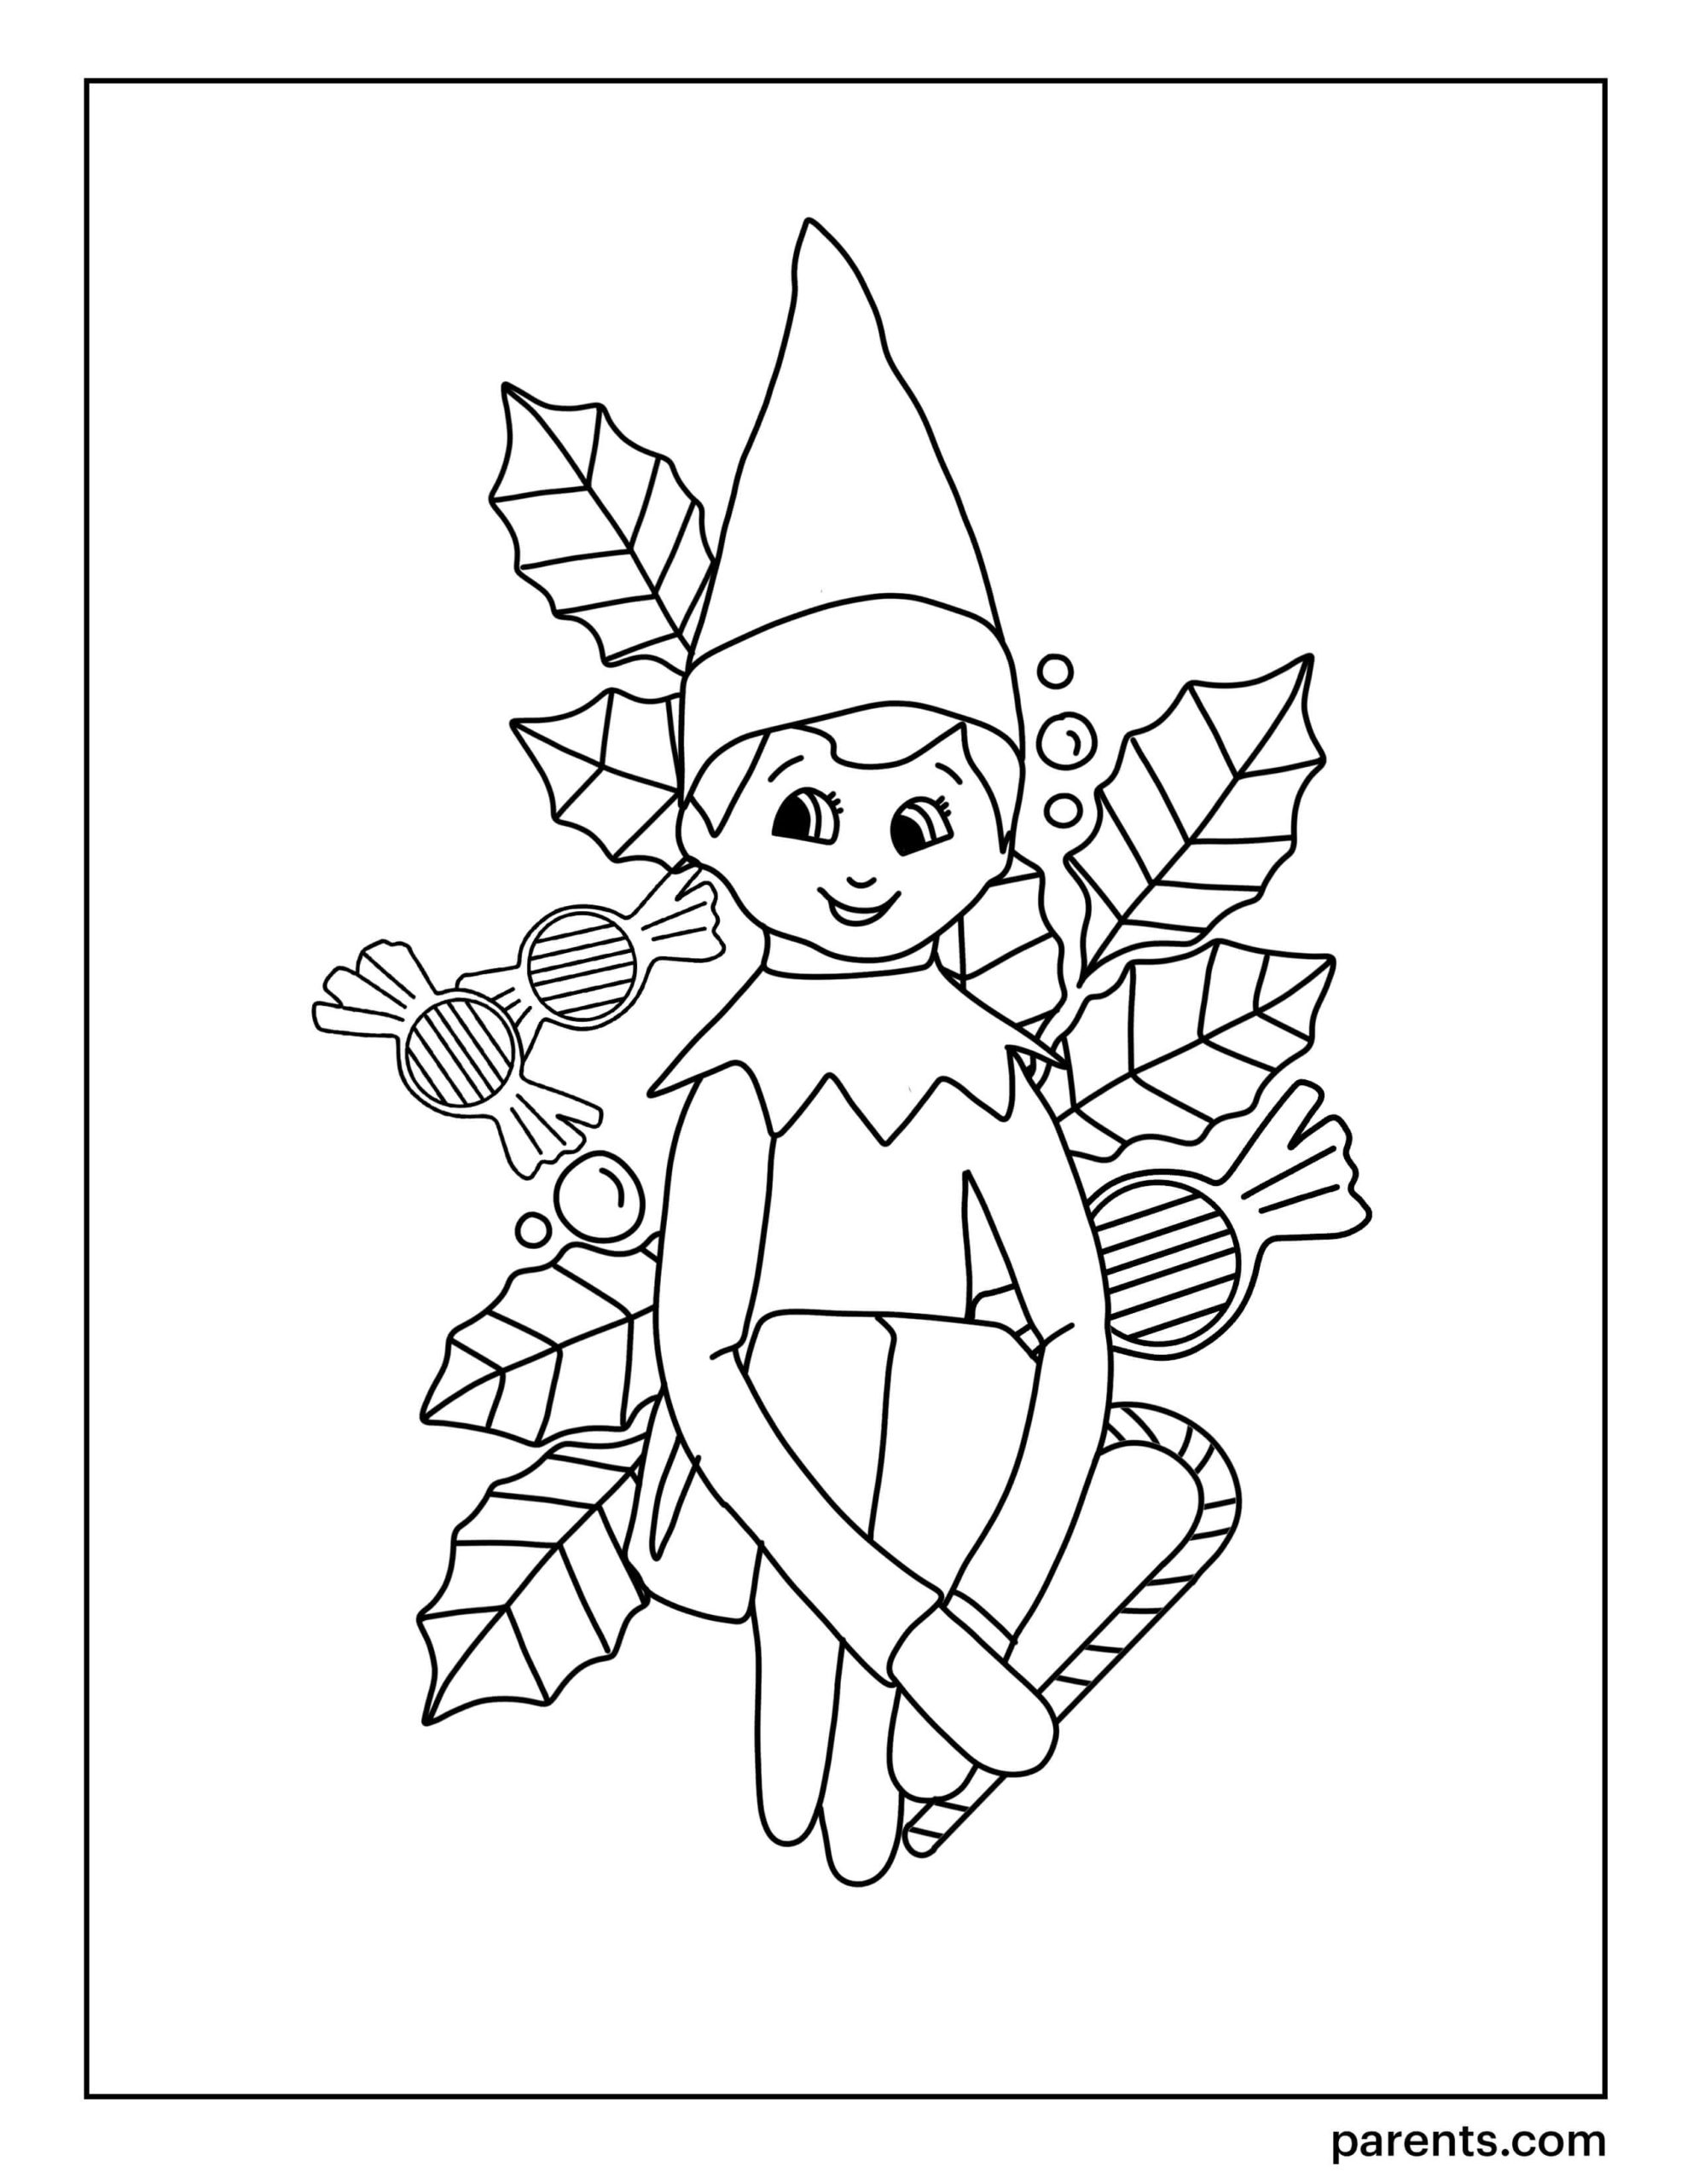 17 Printable Elf Coloring Pages to Enjoy the Holidays Happier Human